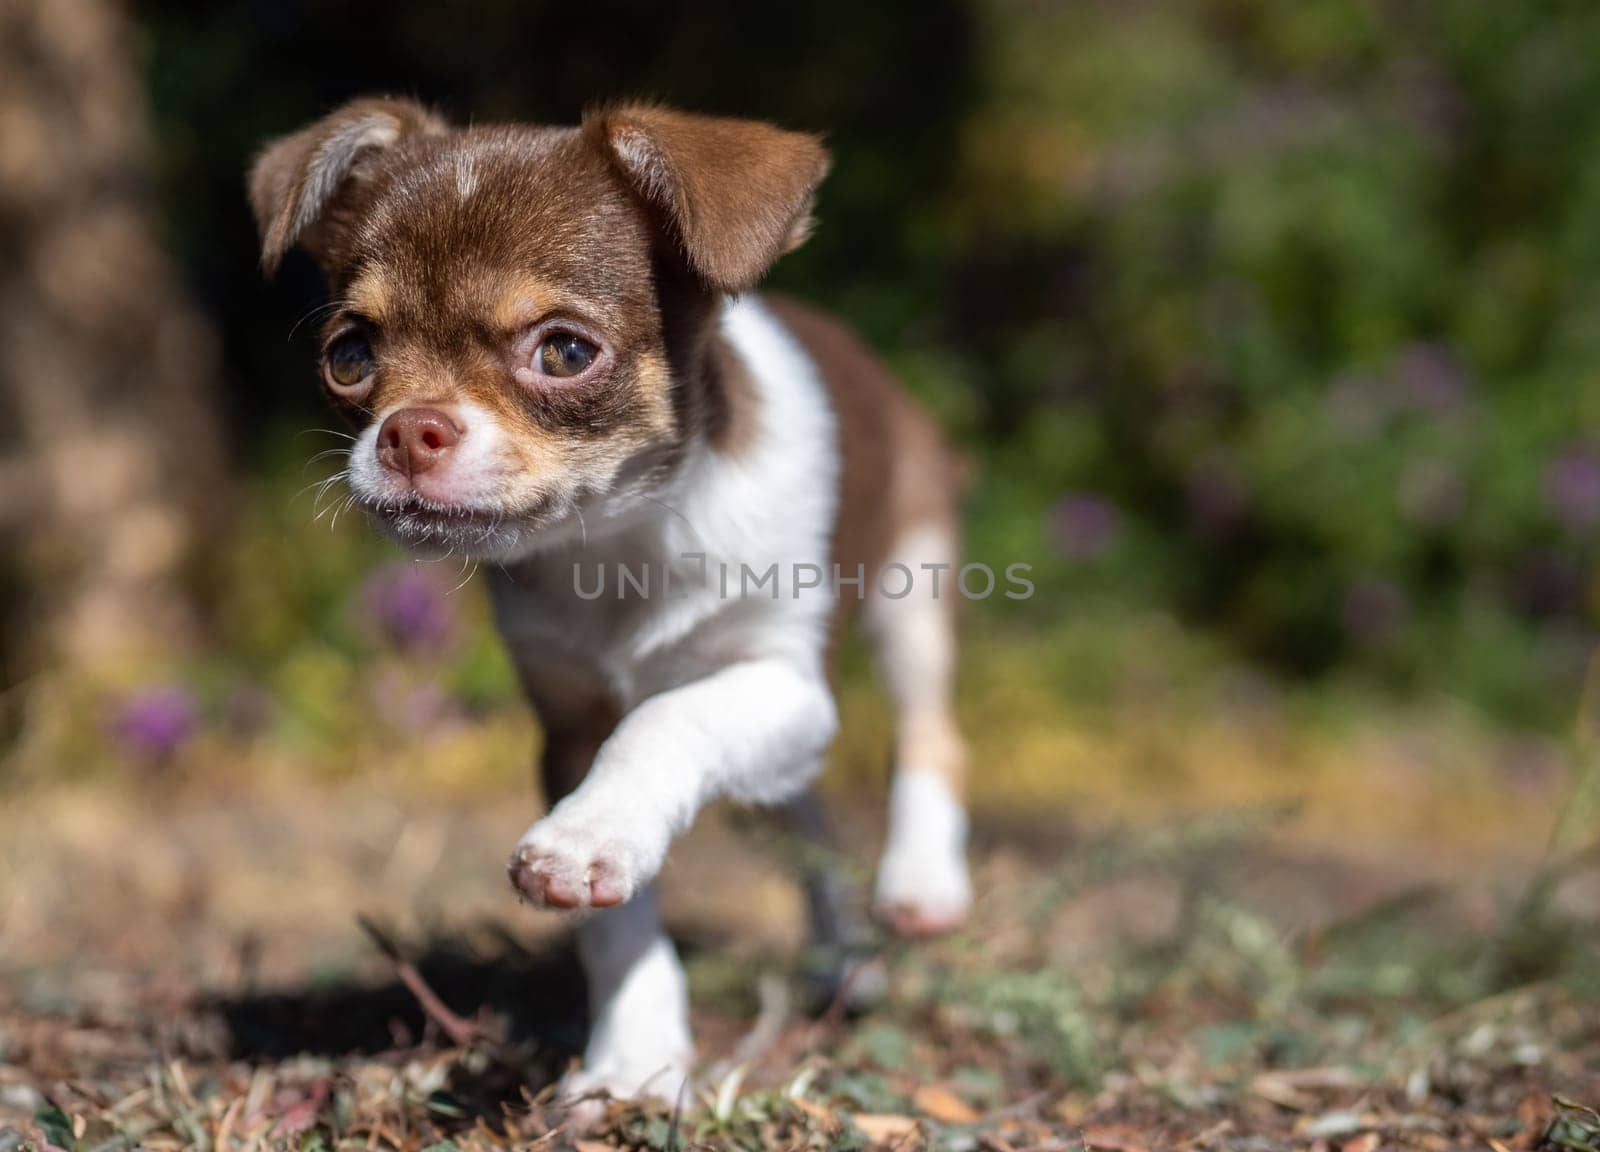 A small brown and white Chihuahua puppy strides forward with determination, surrounded by natural outdoor elements and hints of purple flowers.